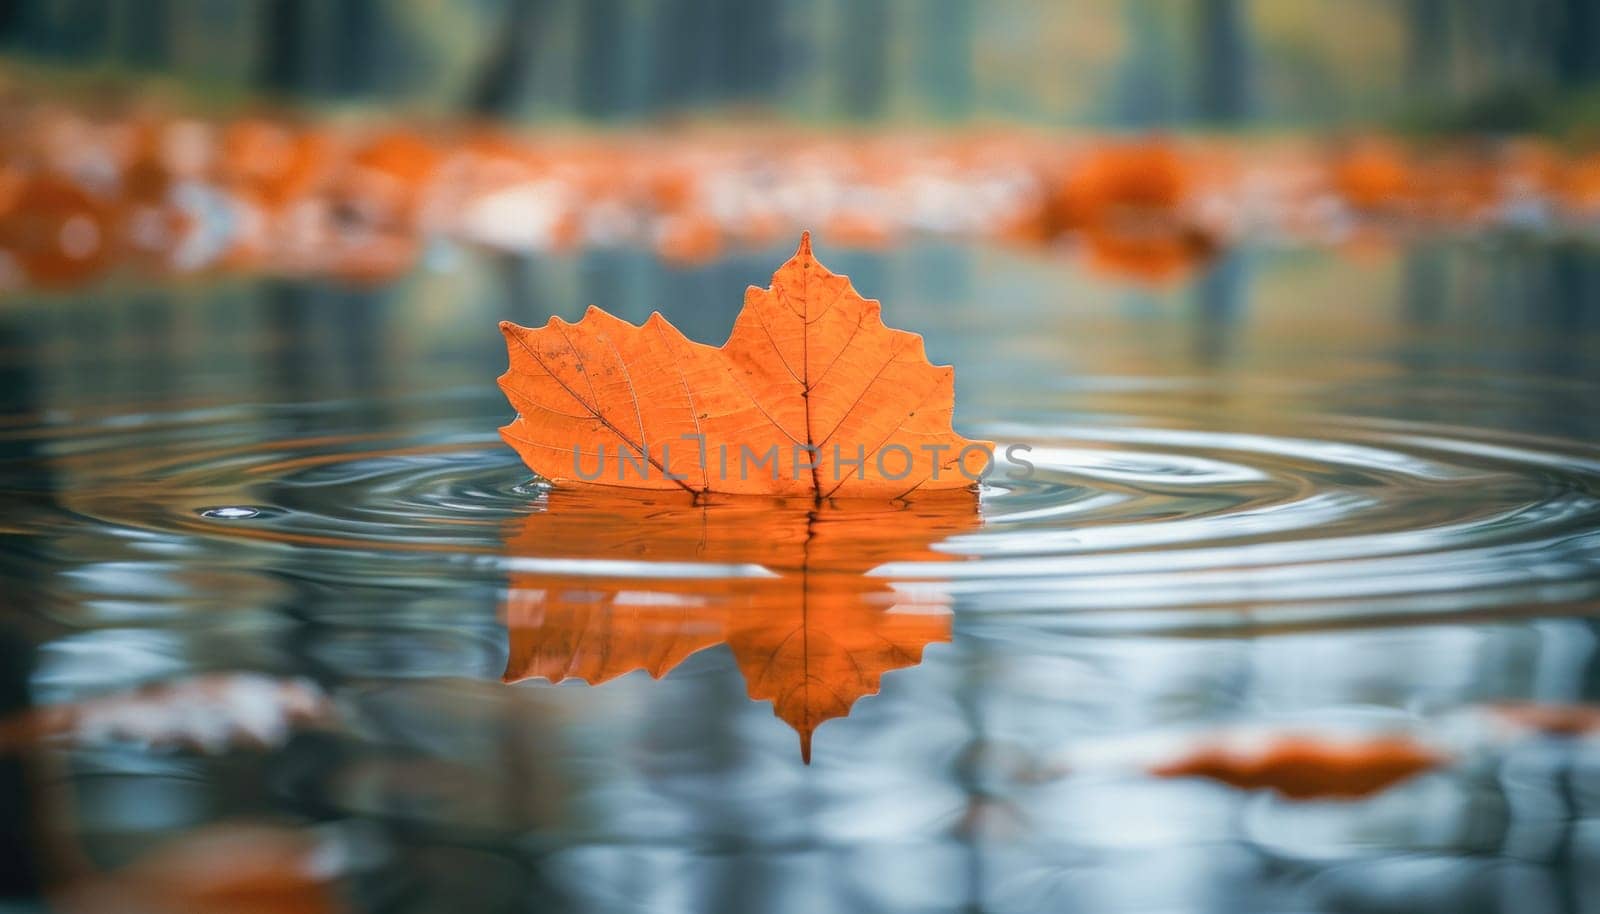 A maple leaf floats on the water in a natural landscape by a lush lake, glistening under the sunlight